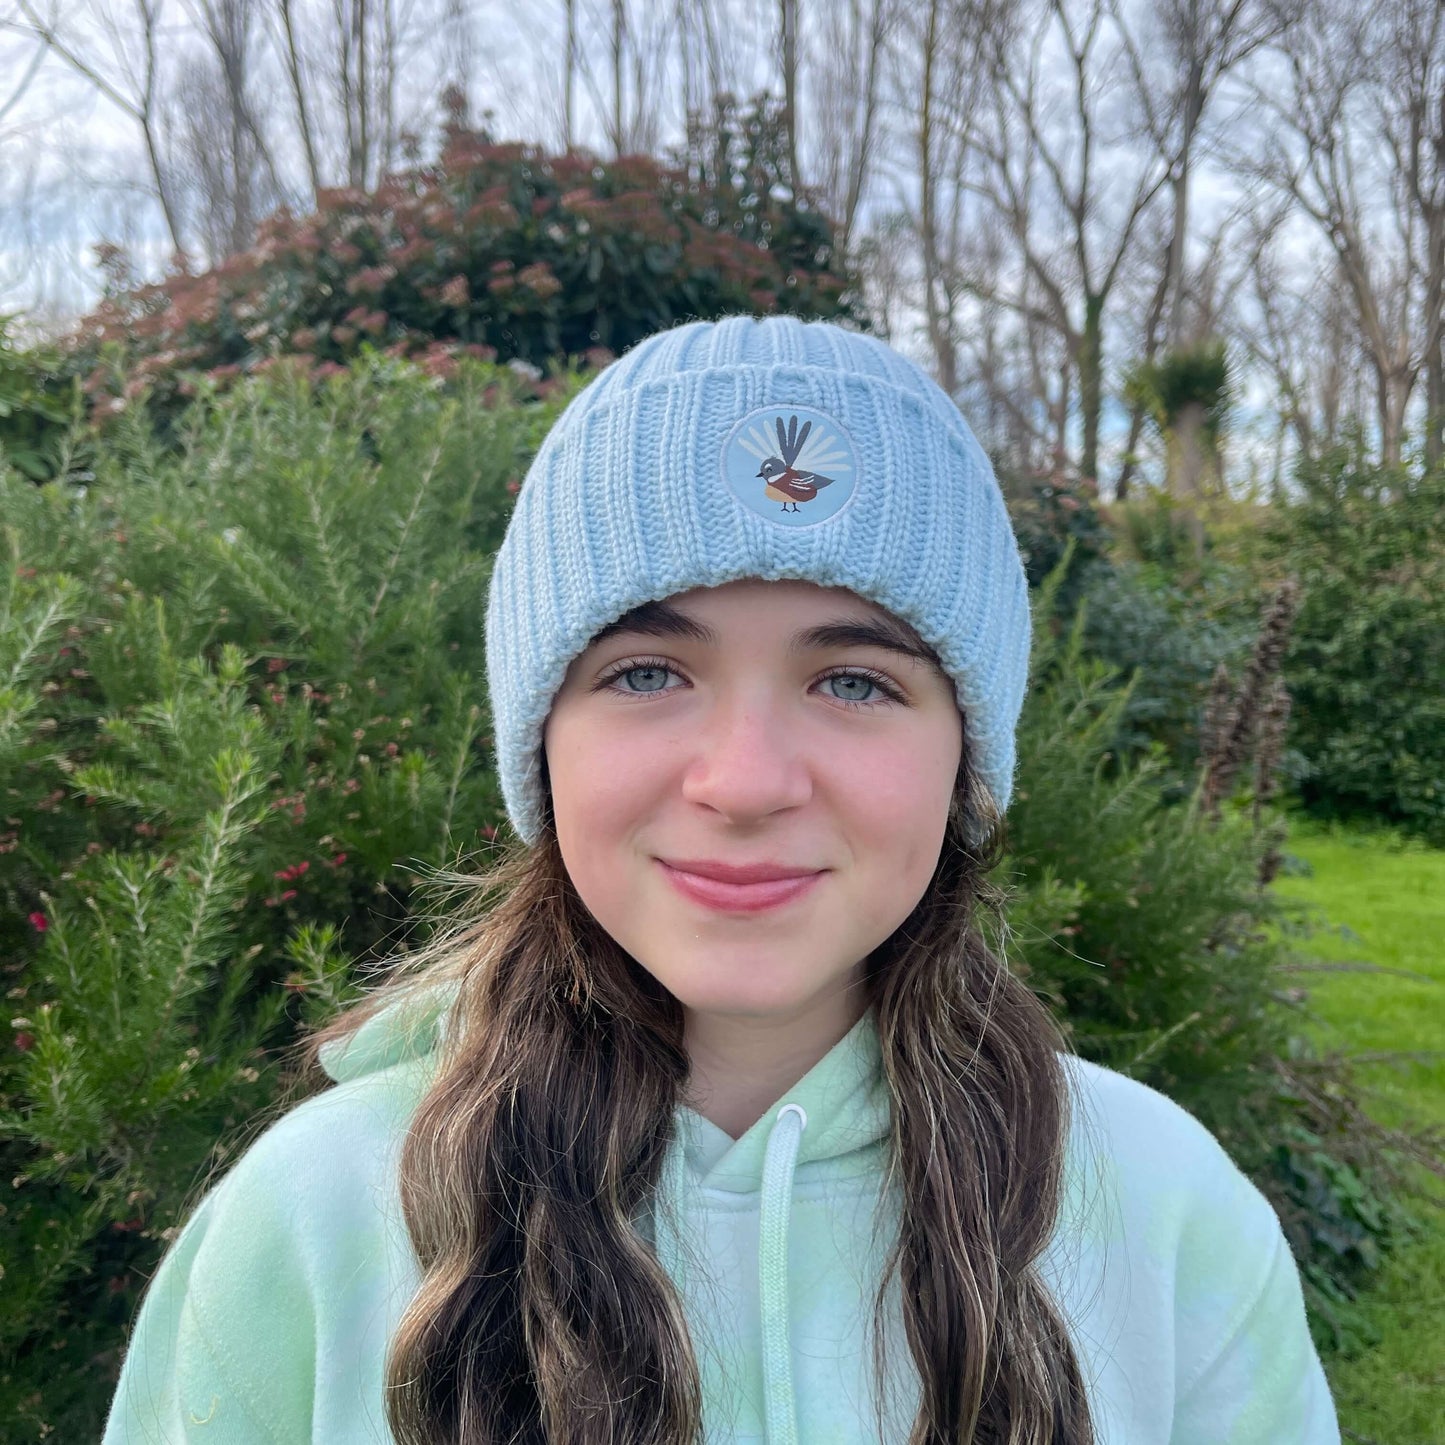 Kids blue knit beanie with fantail emblem on the front.